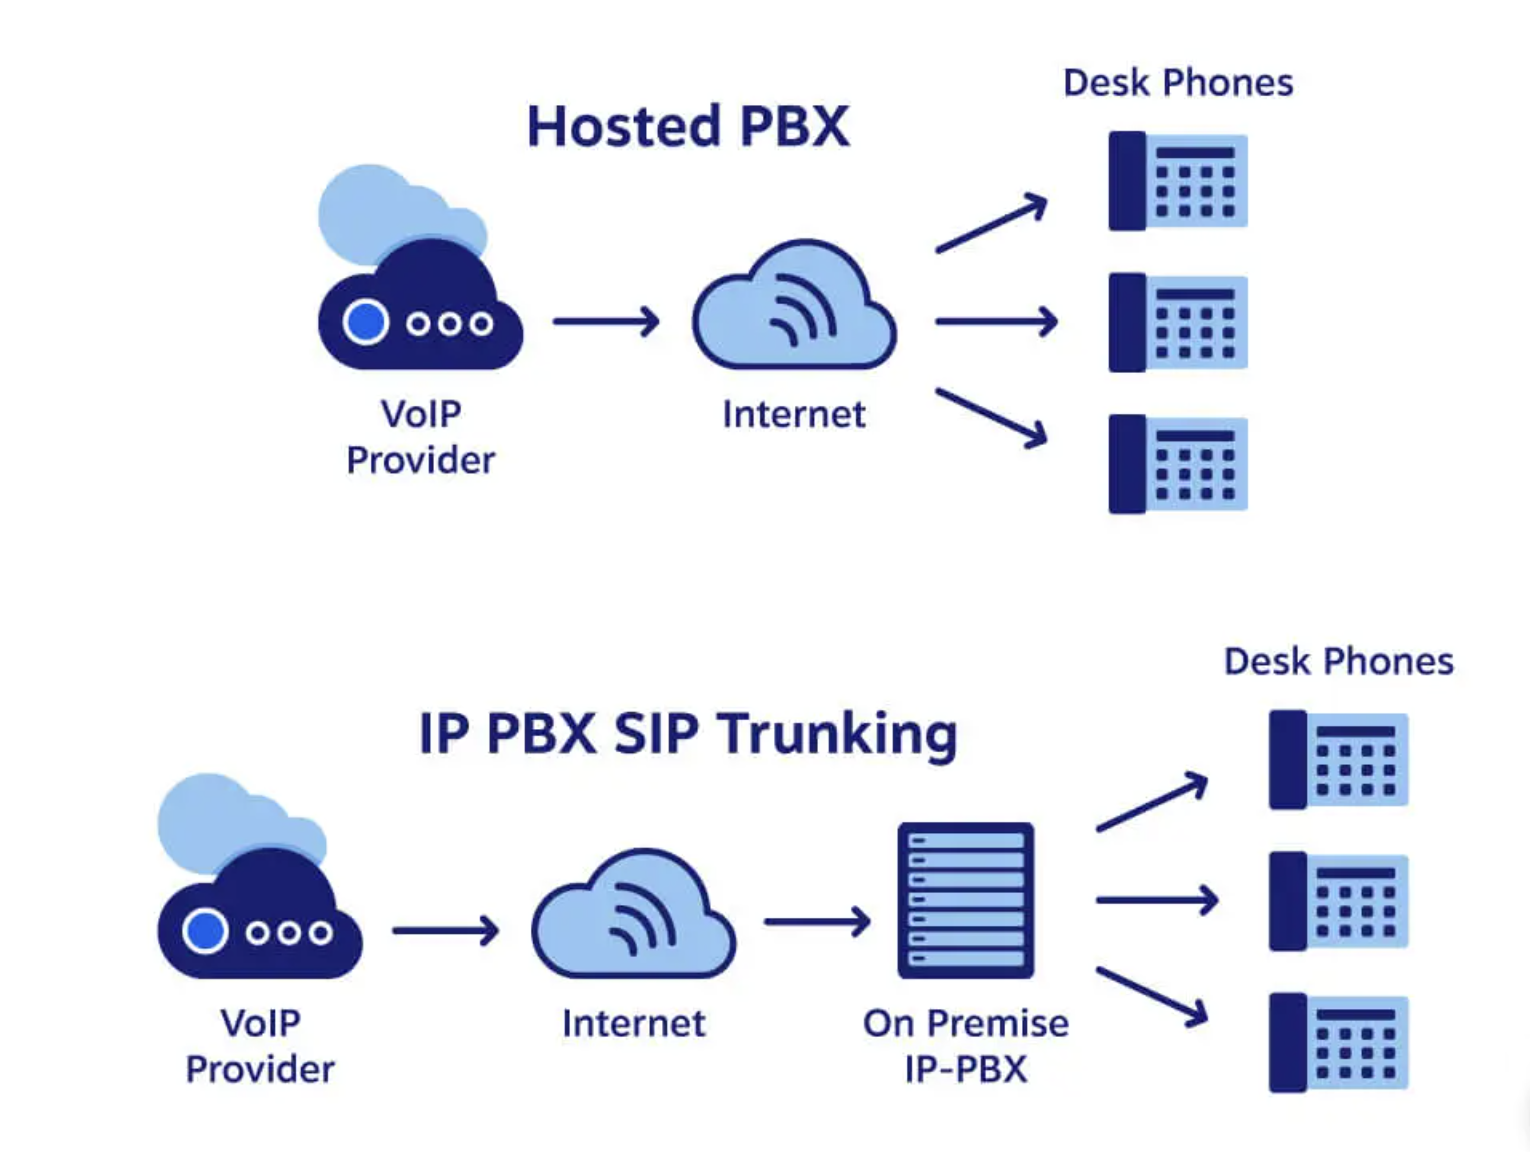 How hosted PBX works